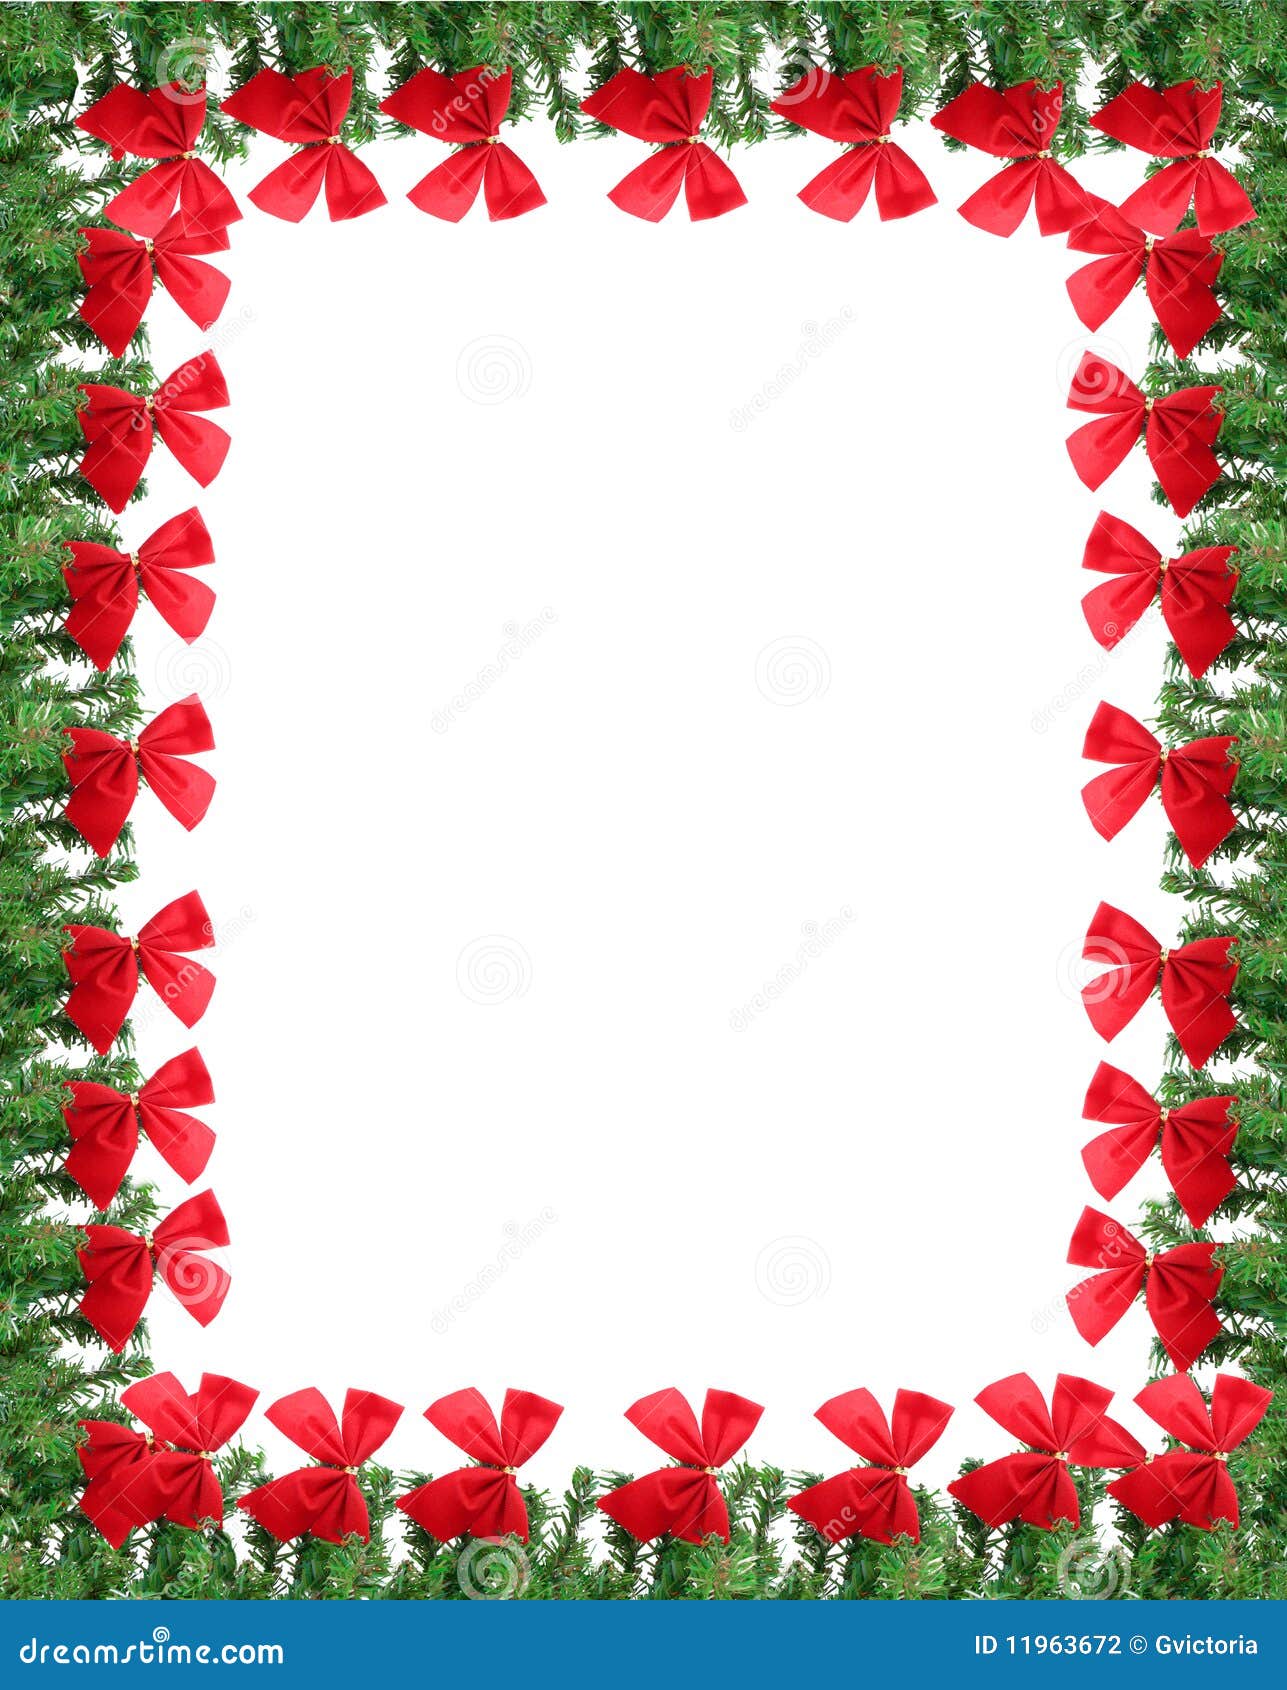 ... with red christmas bows. Great for a greeting card, frame, or border